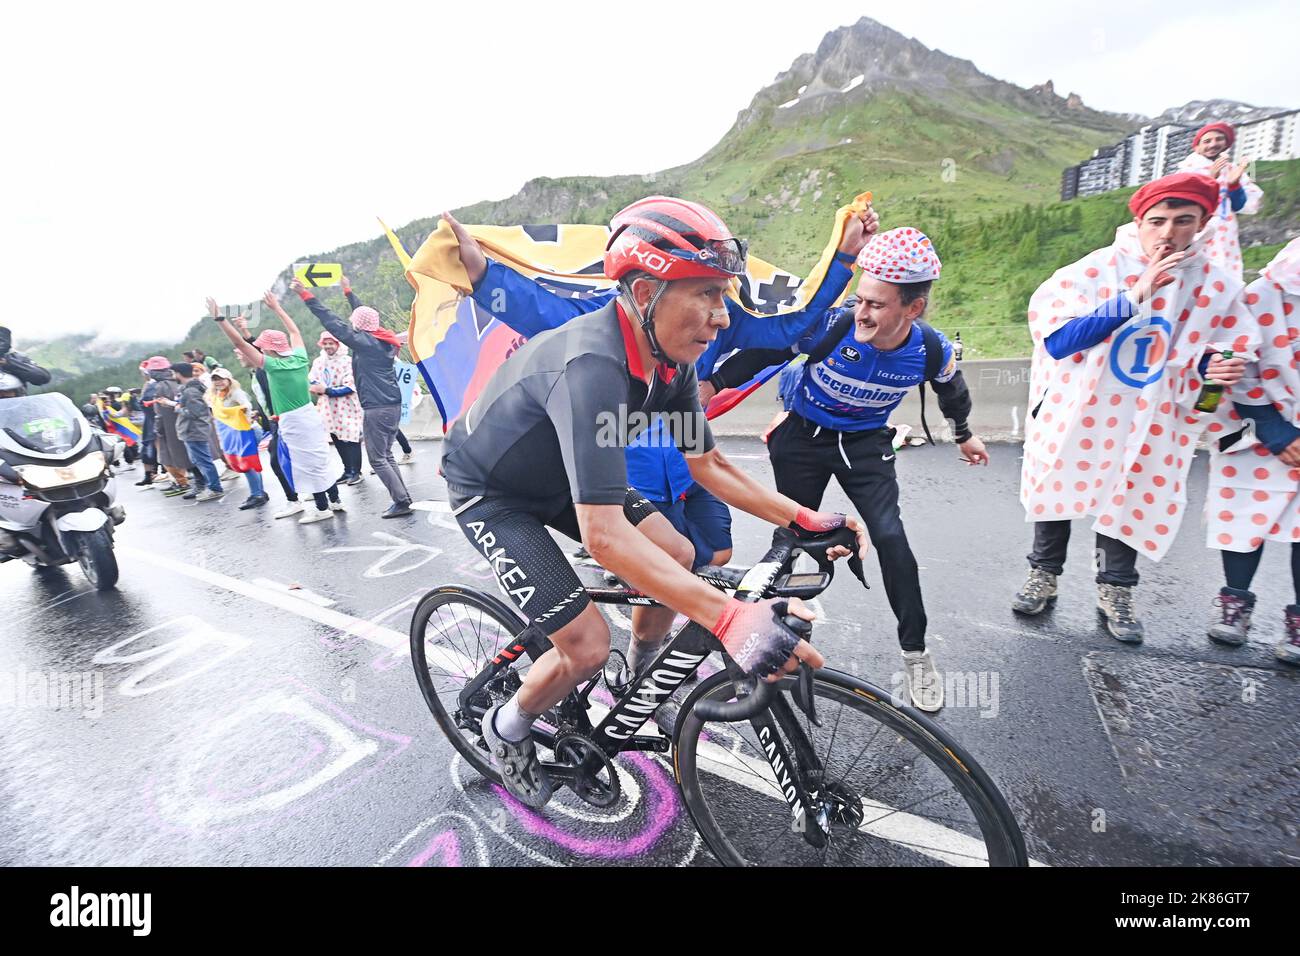 during stage 9 of the Tour de France 2021, Cluses to Tigne. Stock Photo